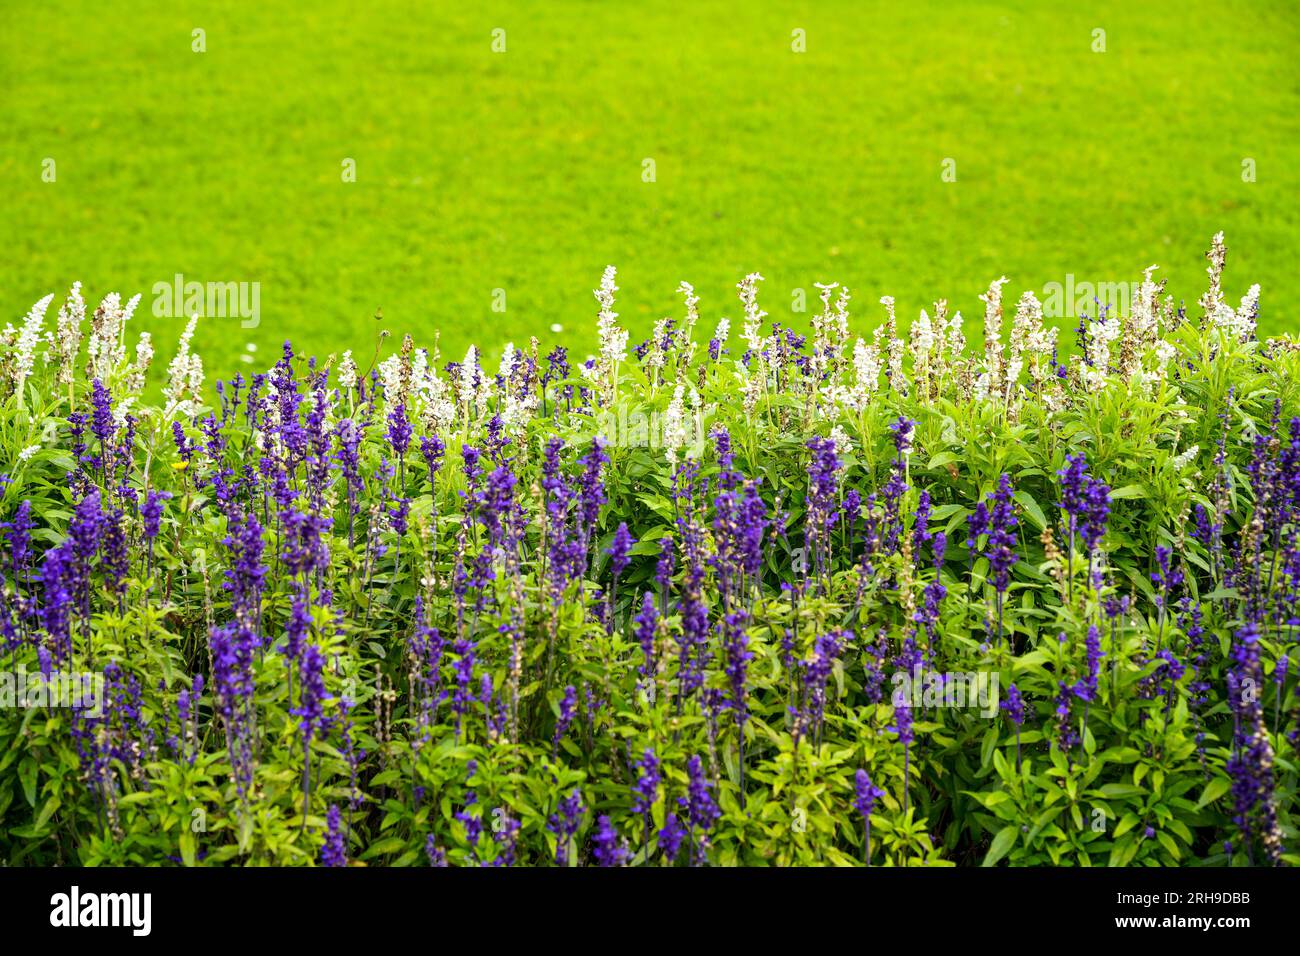 Flowering sage with a green background. Salvia. Stock Photo